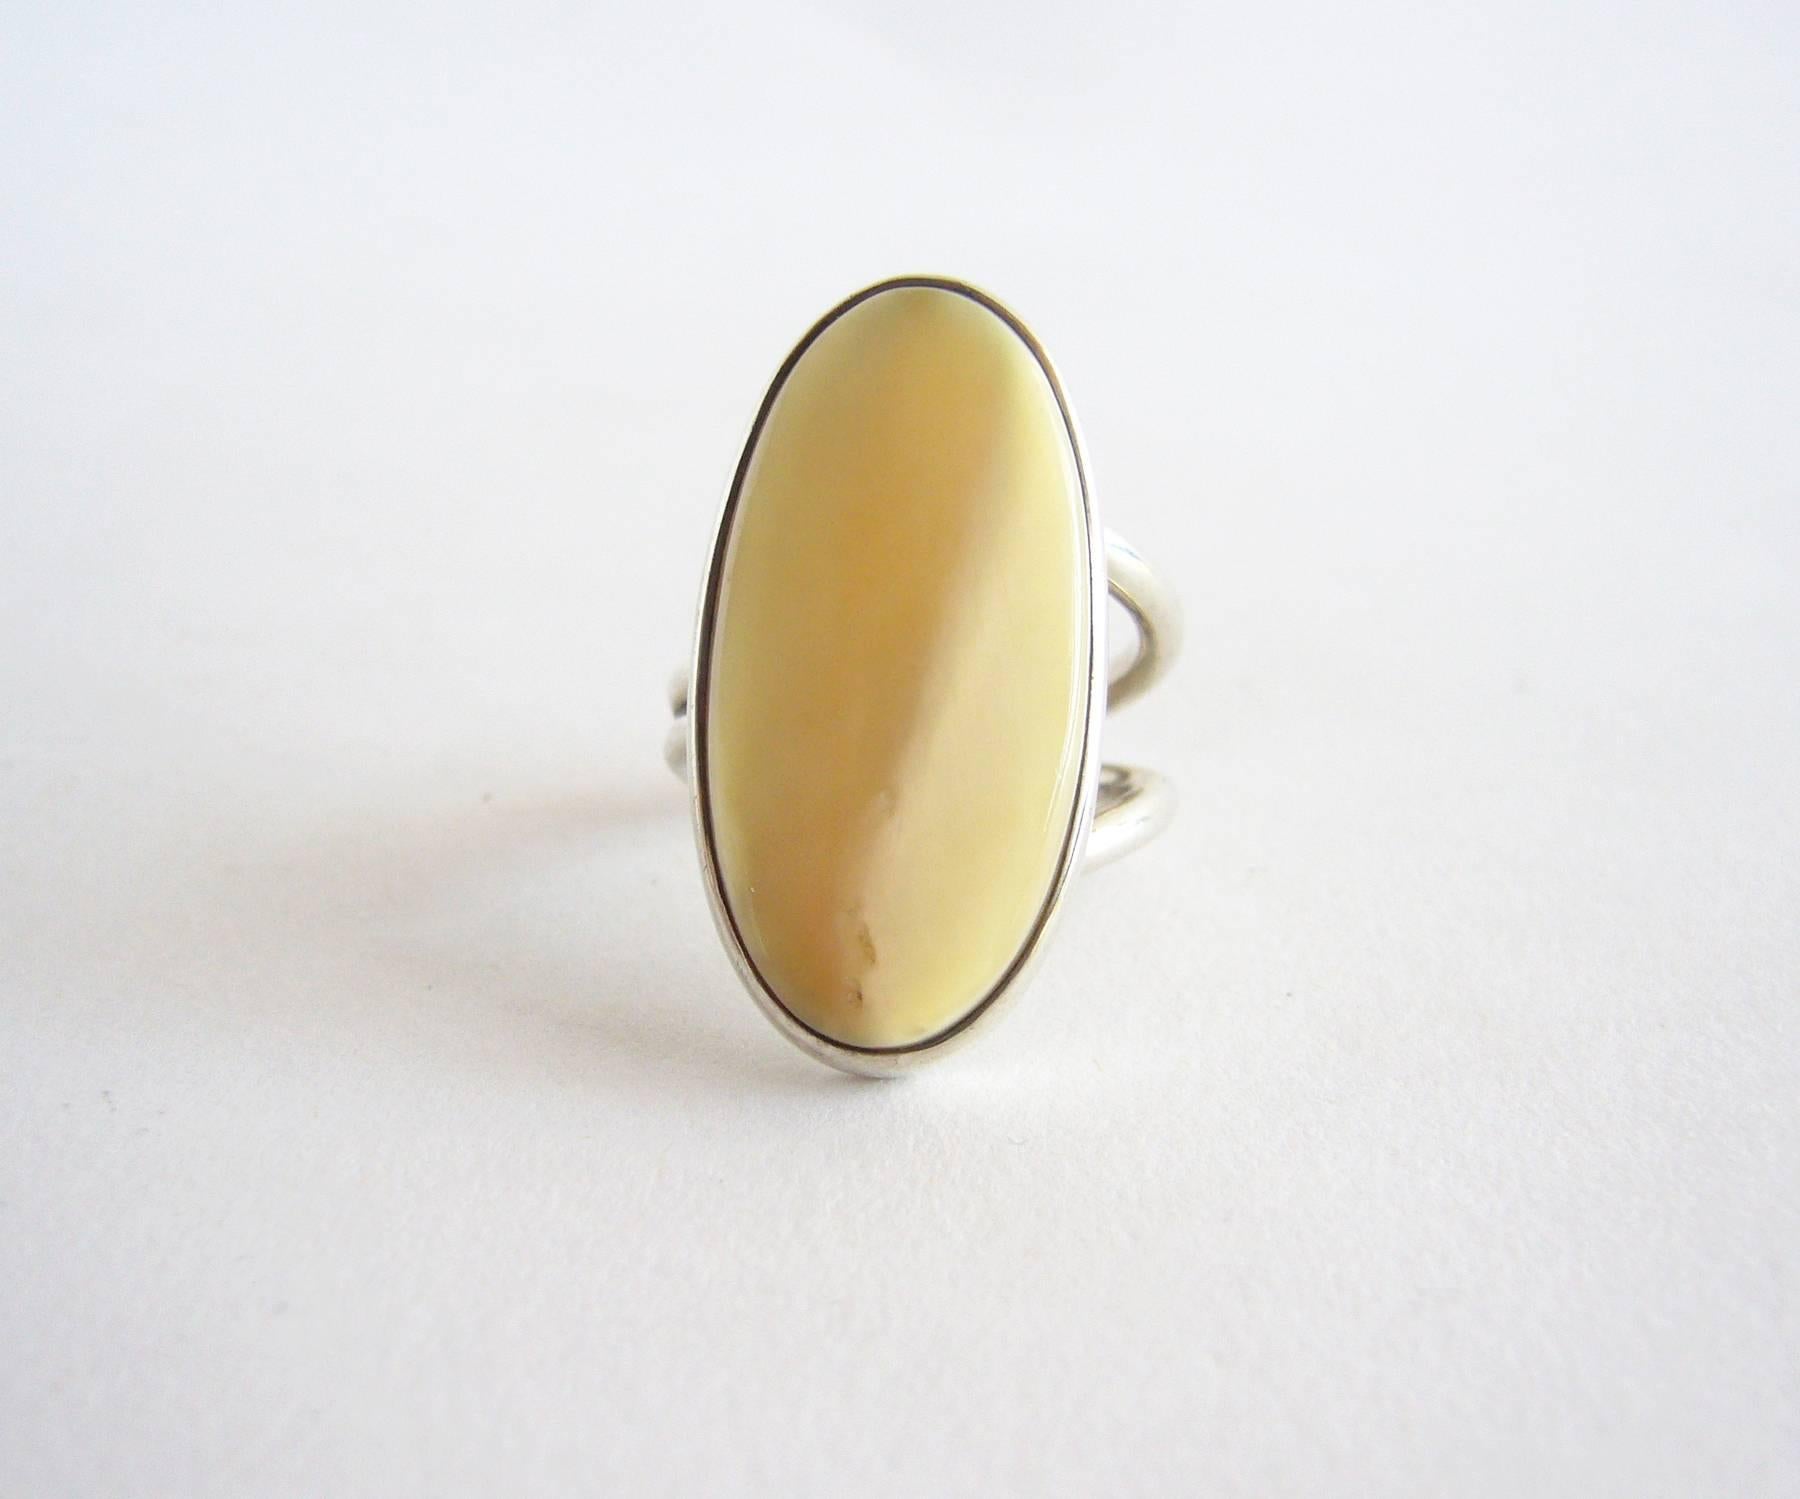 Sterling silver and bone American modernist ring created by Jack Nutting of San Francisco.  Ring is a finger size 4.5 - 5 and could be resized by a competent jeweler.  Face of the ring measures 1 1/8